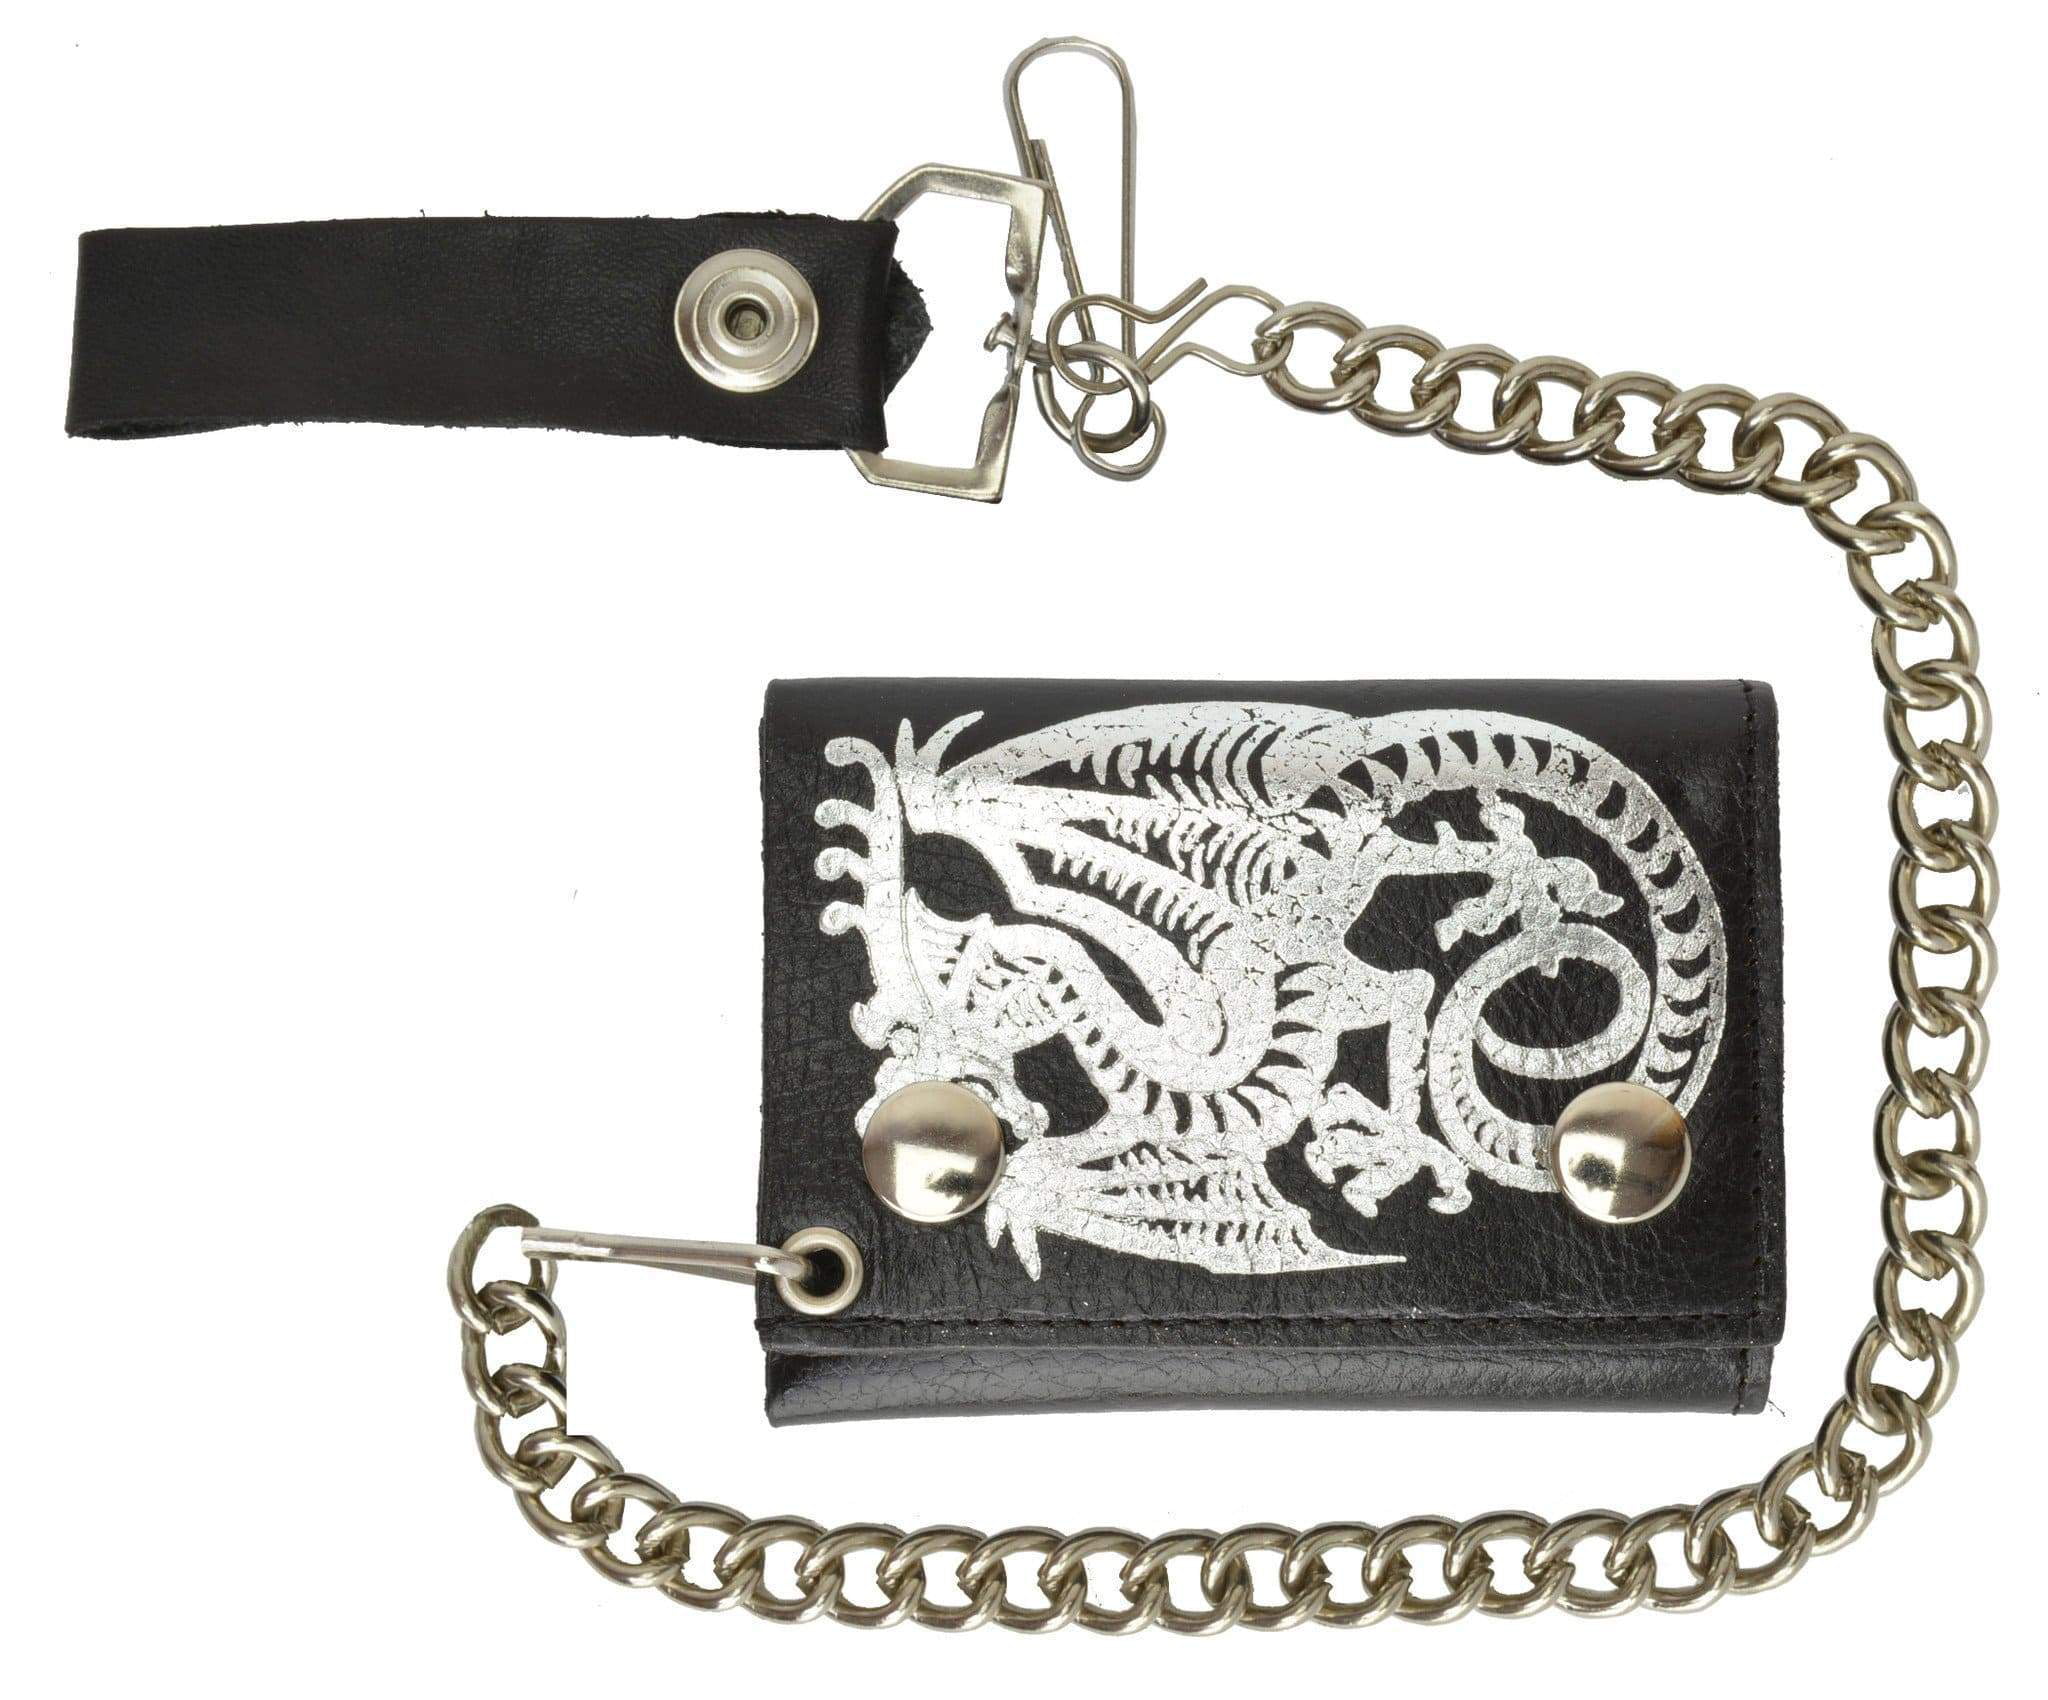 DRAGON TRIFOLD BIKER LEATHER WALLET WITH CHAIN 